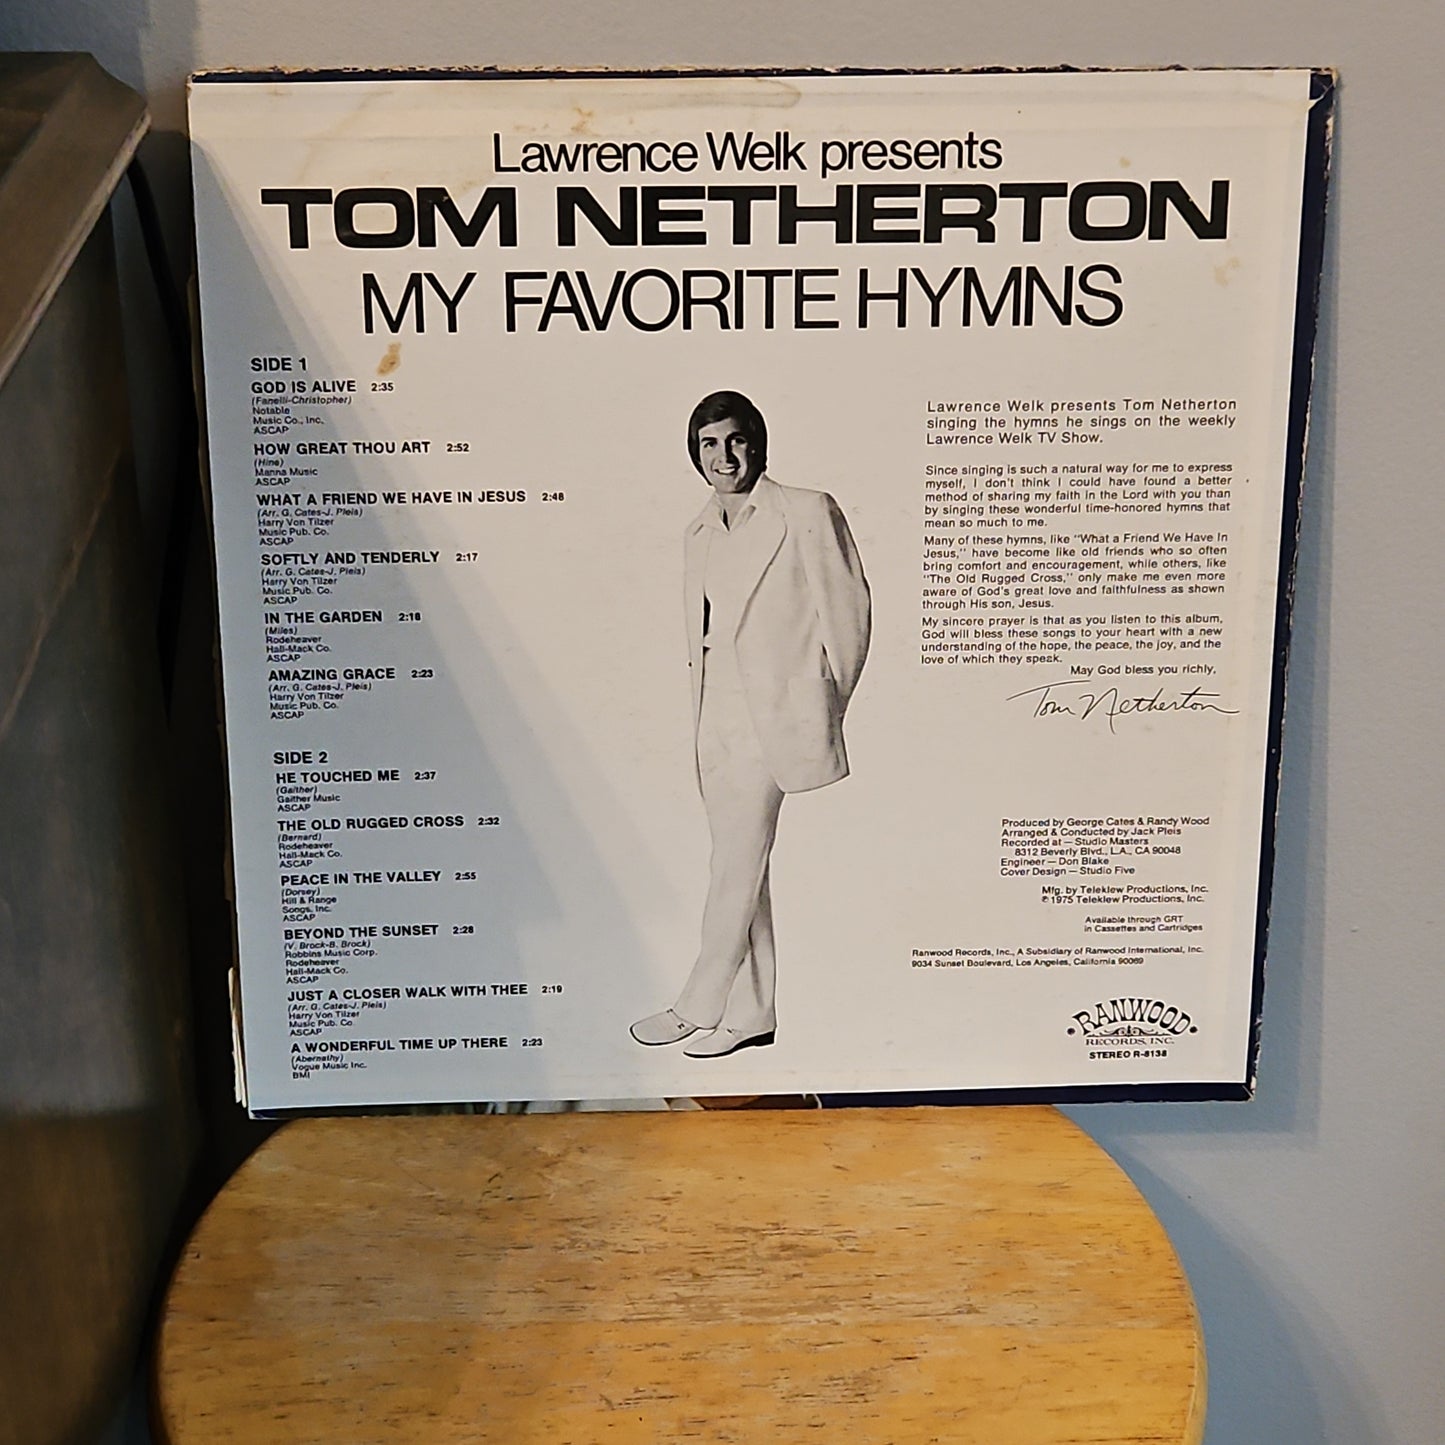 Lawrence Welk Presents Tom Netherton My Favorite Hymns By Ranwood Records